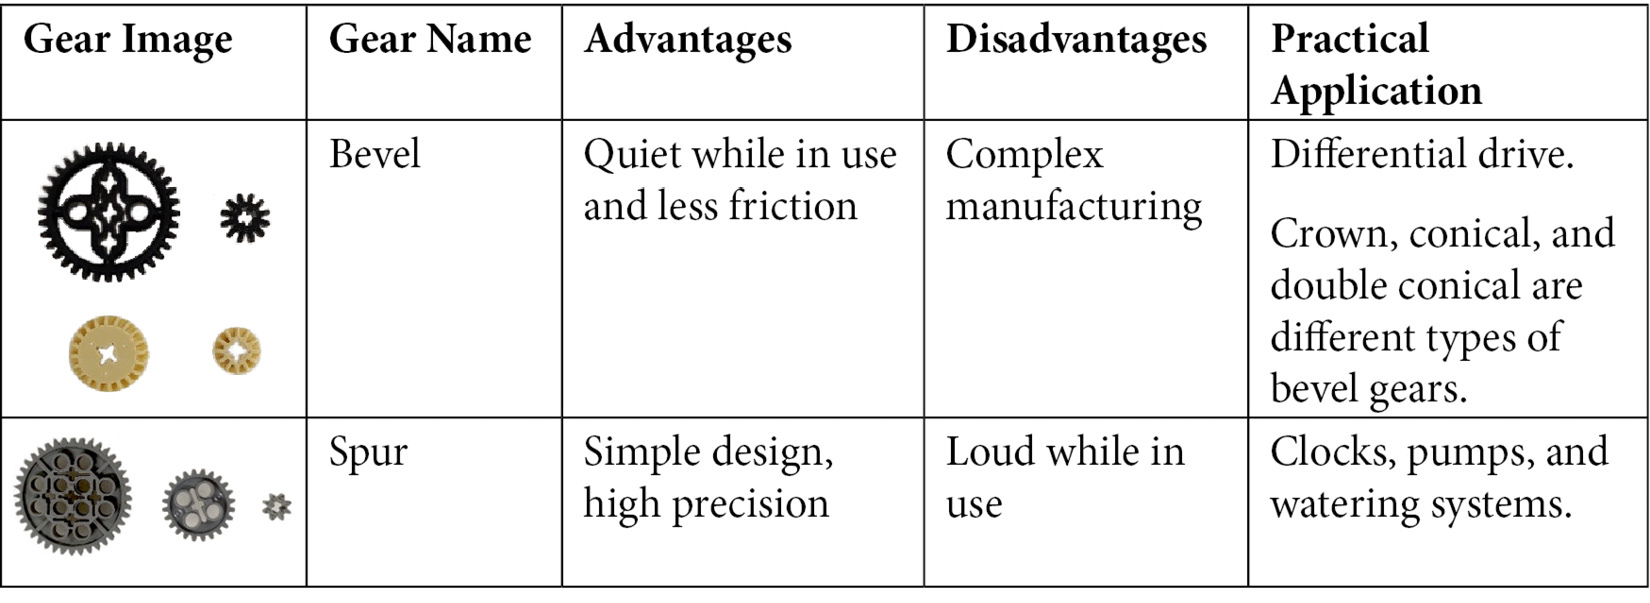 Table 5.1 - Different types of gears
